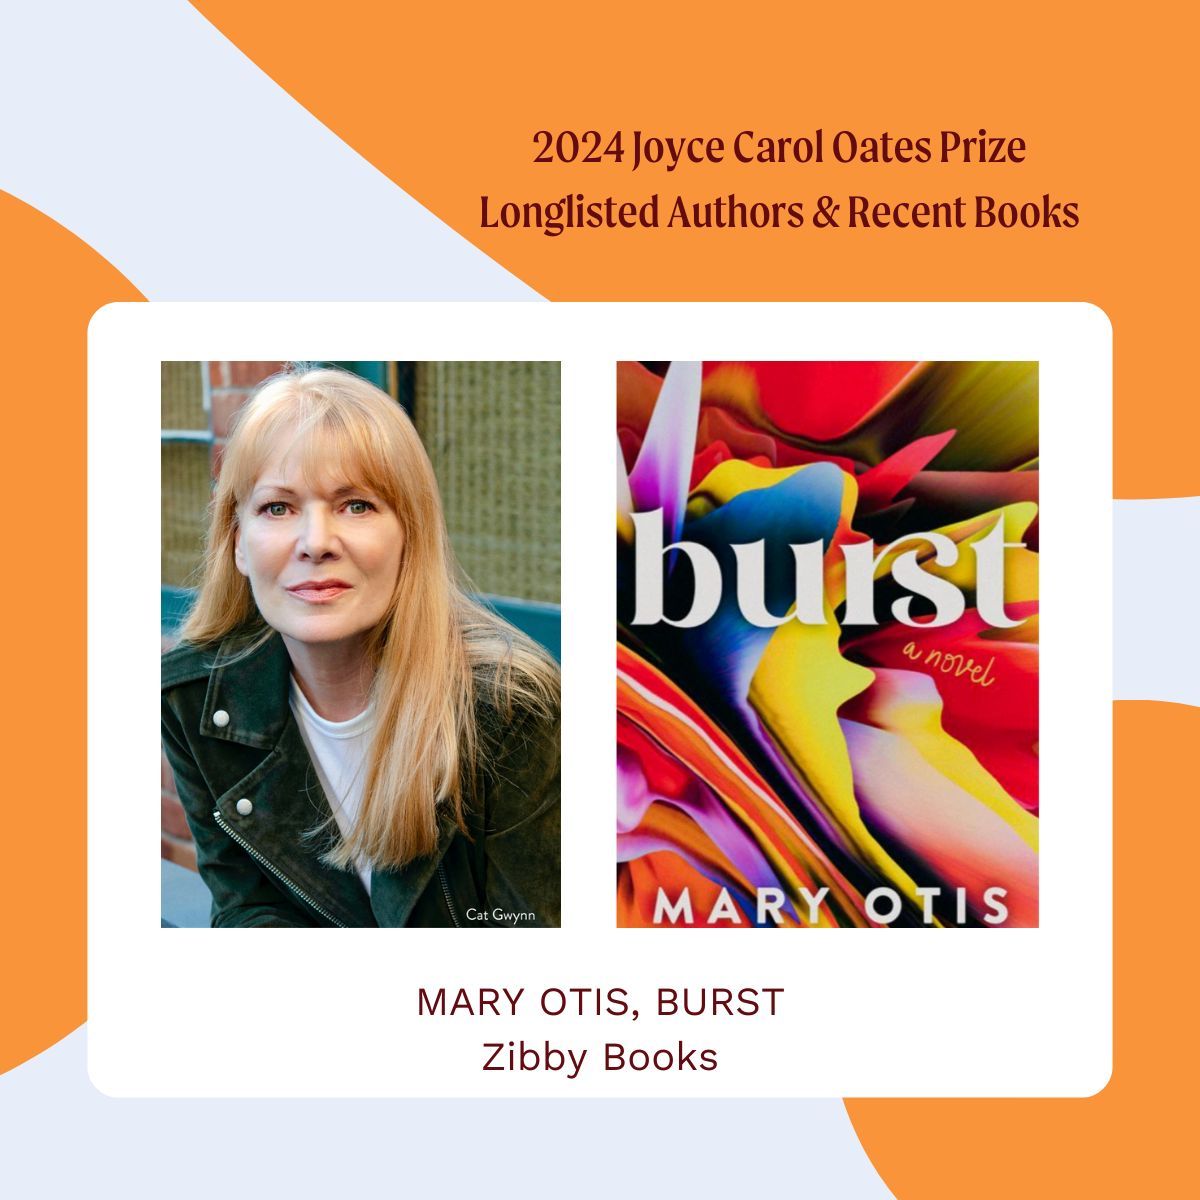 Congratulations to Mary Otis. Publishers Weekly writes of Burst, 'in lyrical language that expresses both Viva’s and Charlotte’s perspectives, Otis portrays a mother and daughter caught in a tense pas de deux, perpetually pushing one another away before returning to each other.'